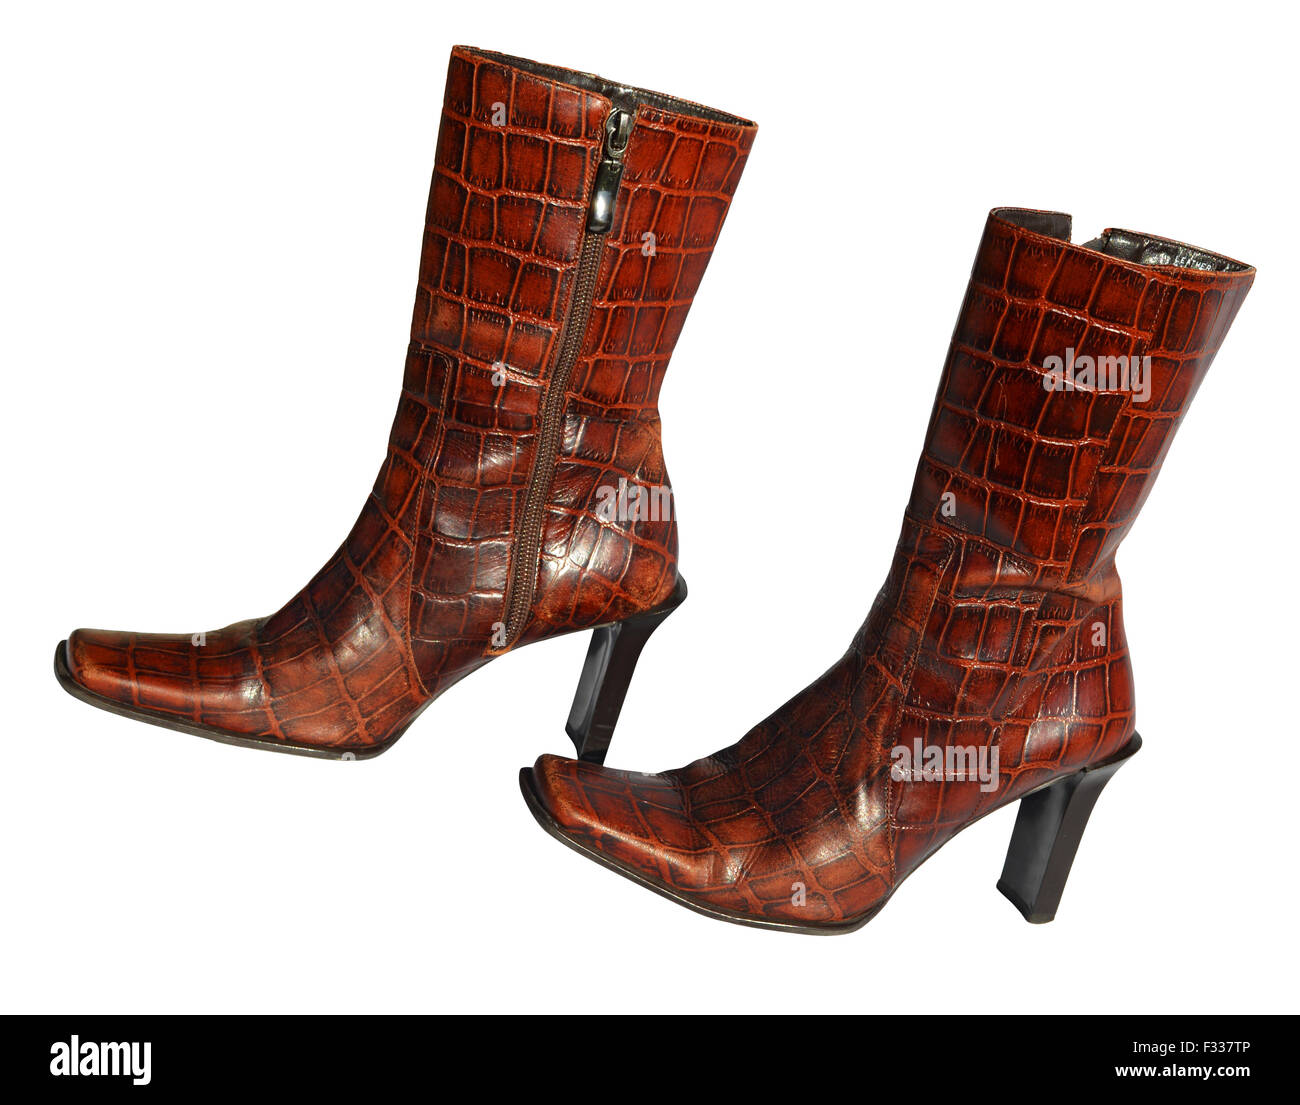 Crocodile Boots Mexico | vlr.eng.br